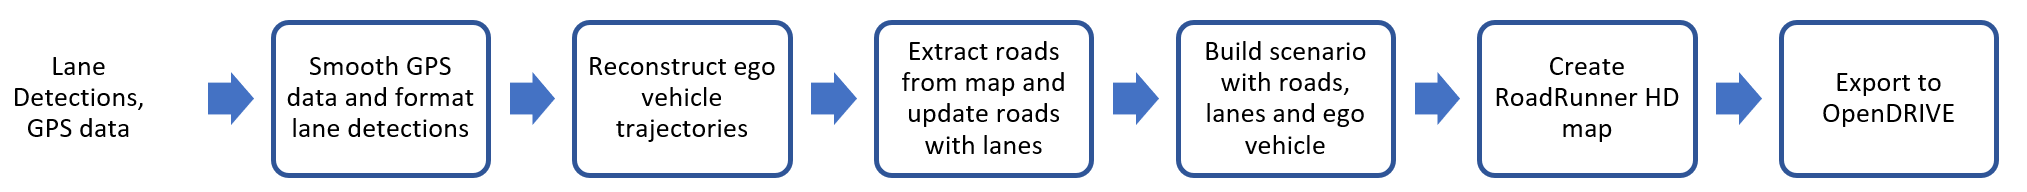 Workflow for generating HD map using recorded lane detections and GPS sensor data